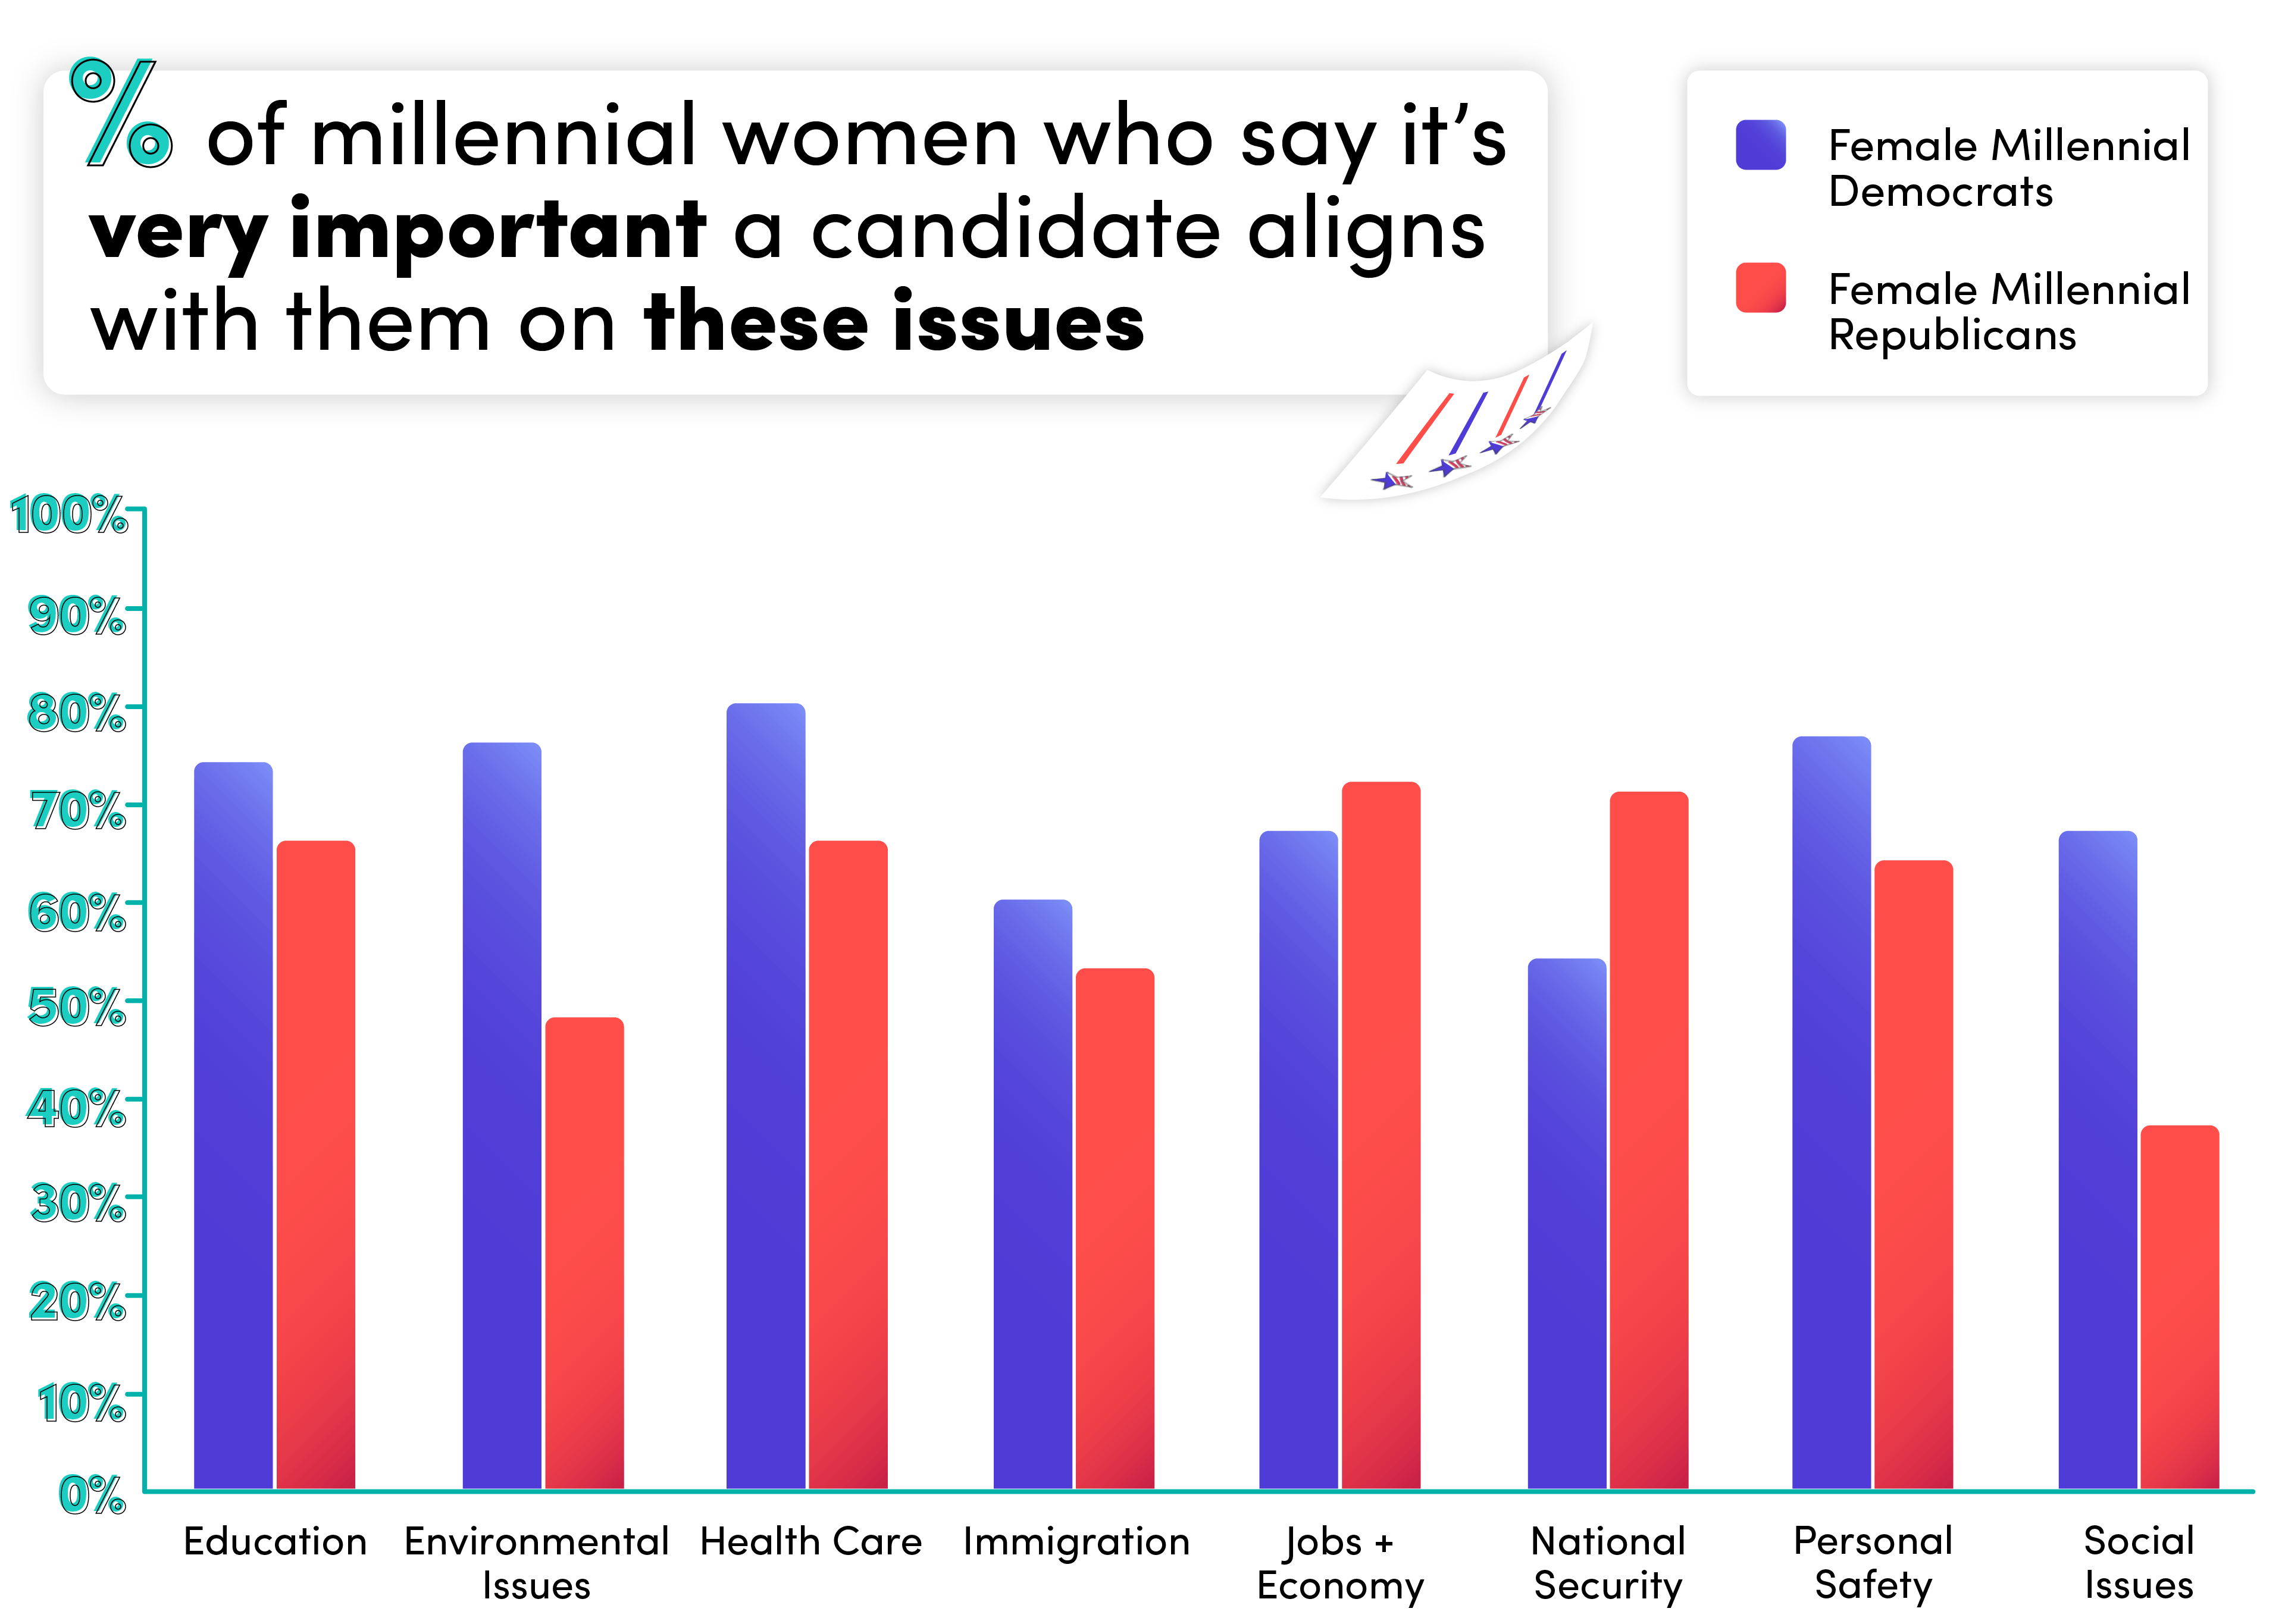 Percentage of millennial women who say it's very important a candidate aligns with them on these issues